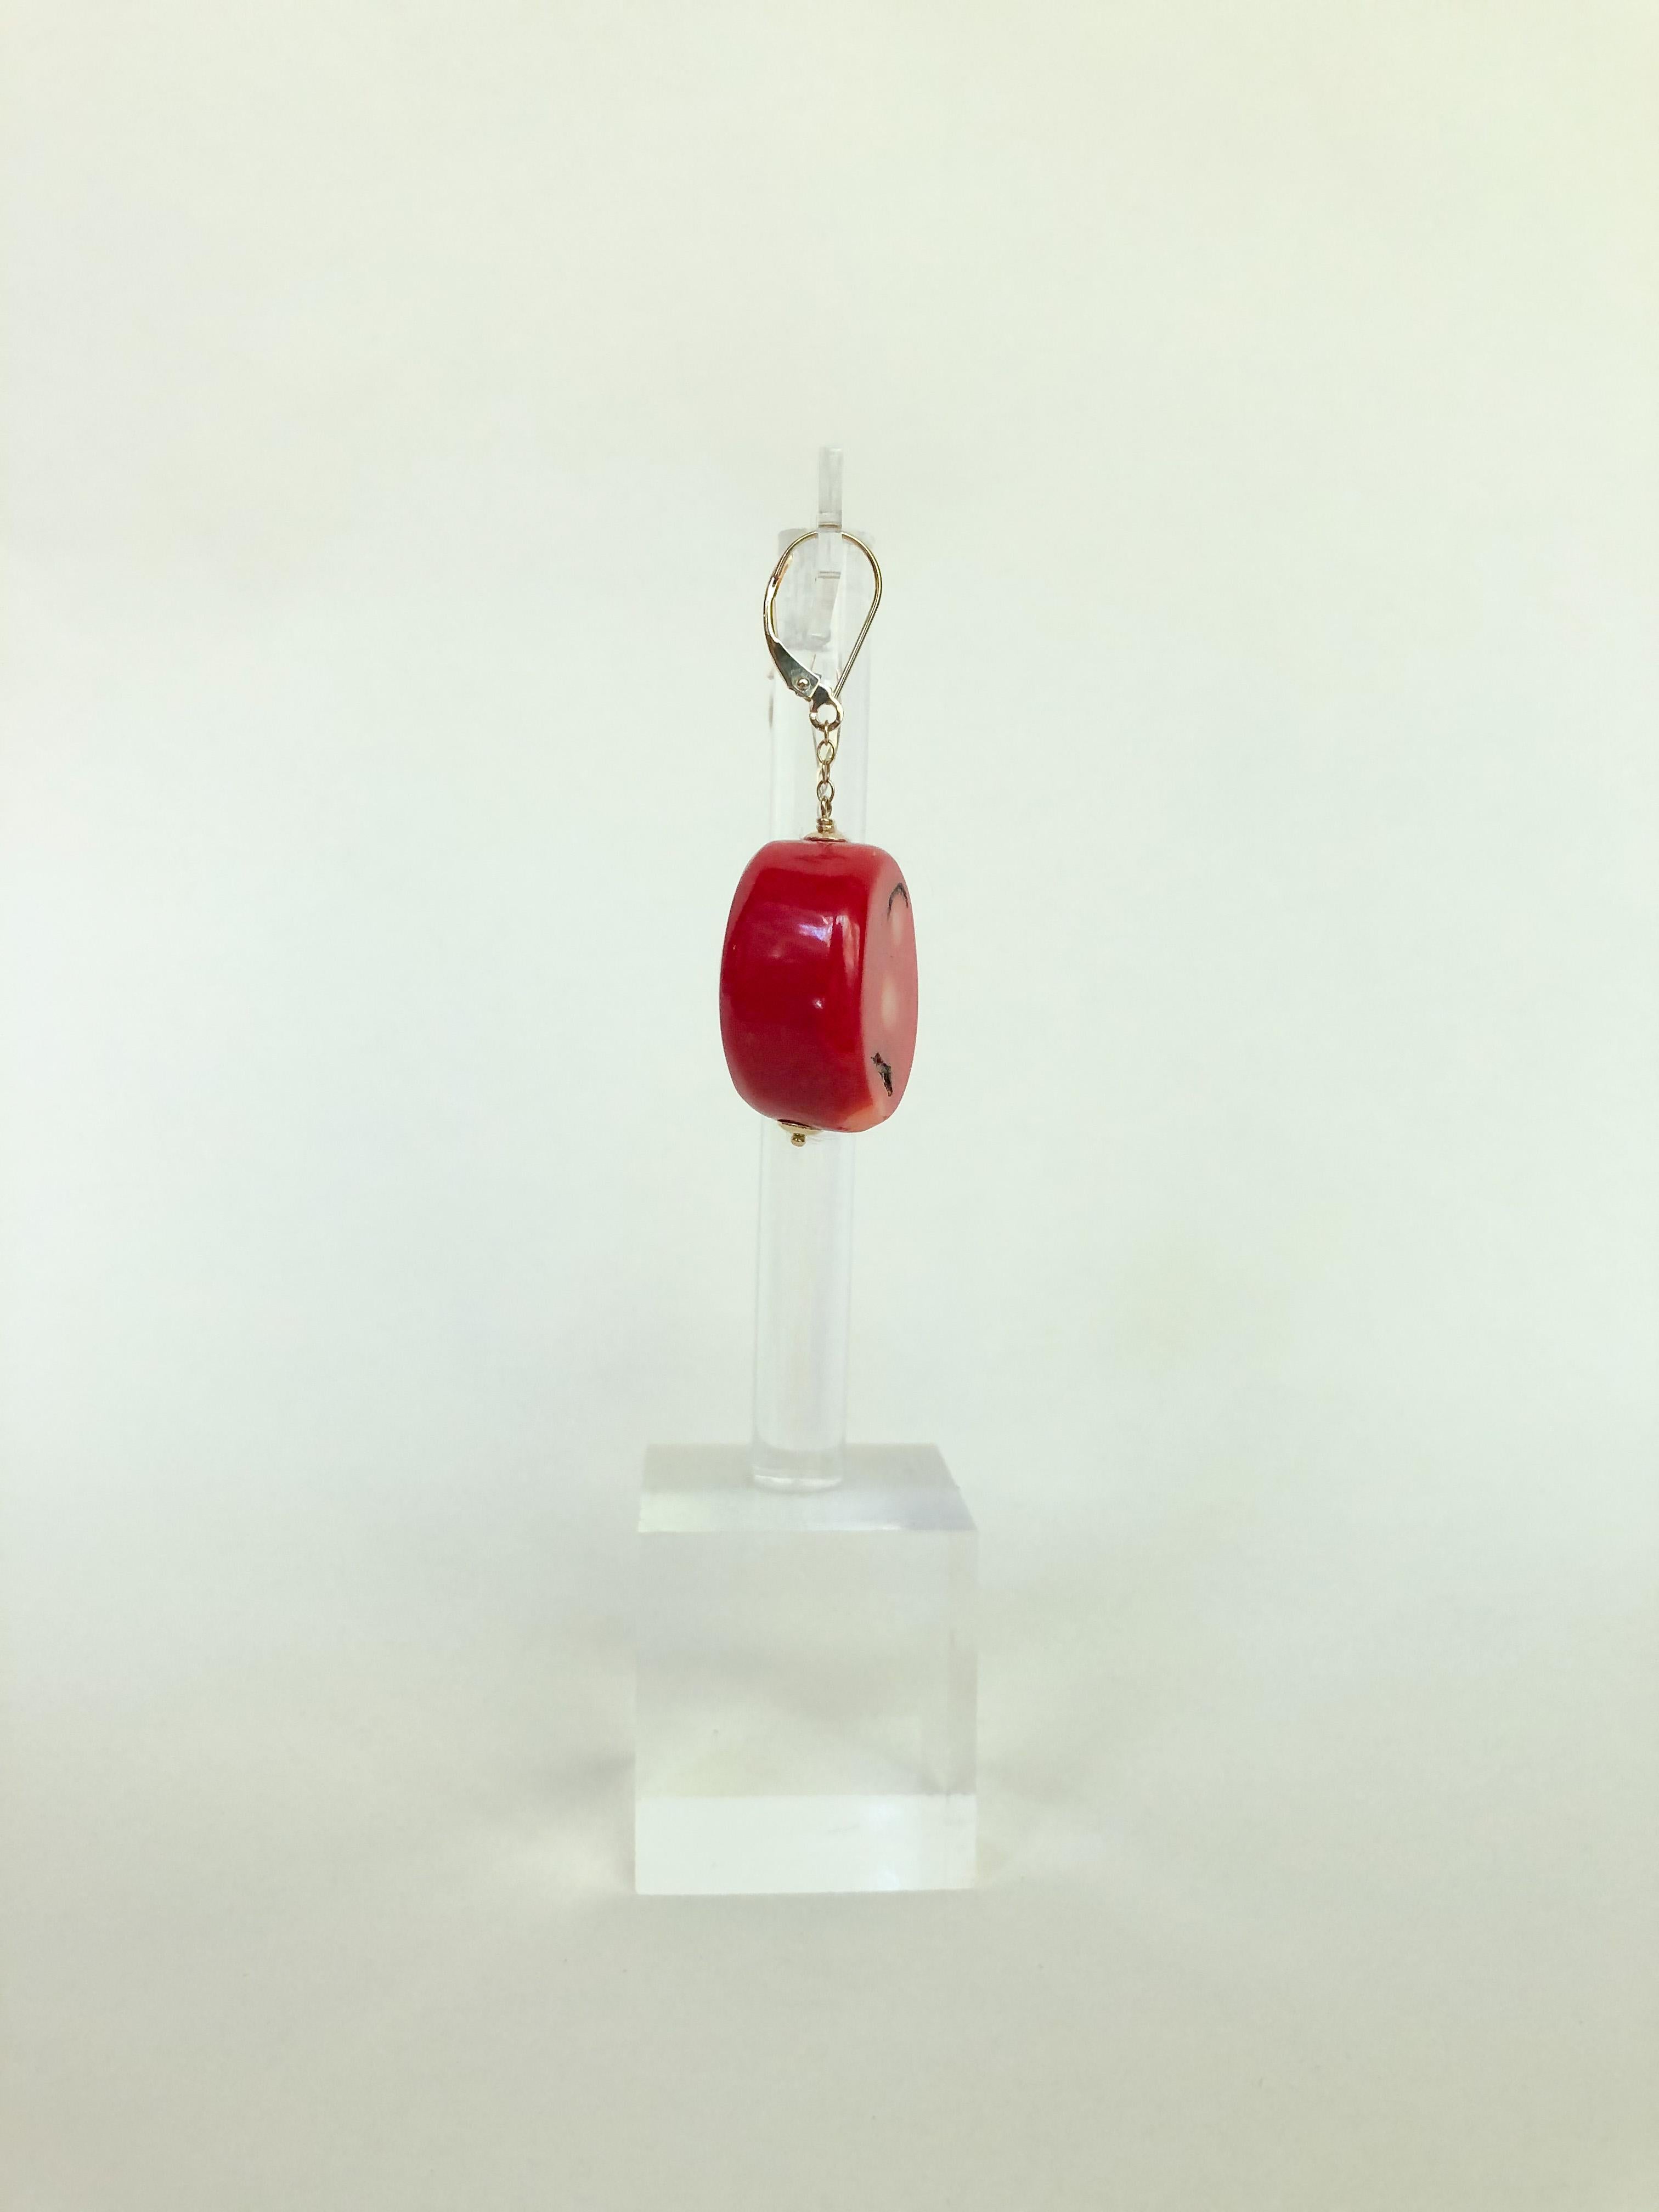 Marina J. presents these stunning coral earrings with 14k yellow gold. The coral stones are 23 cm long, and are a vibrant red that is sure to grab anyone's attention. The wiring is made of 14k yellow gold and has secure lever-backs to keep the